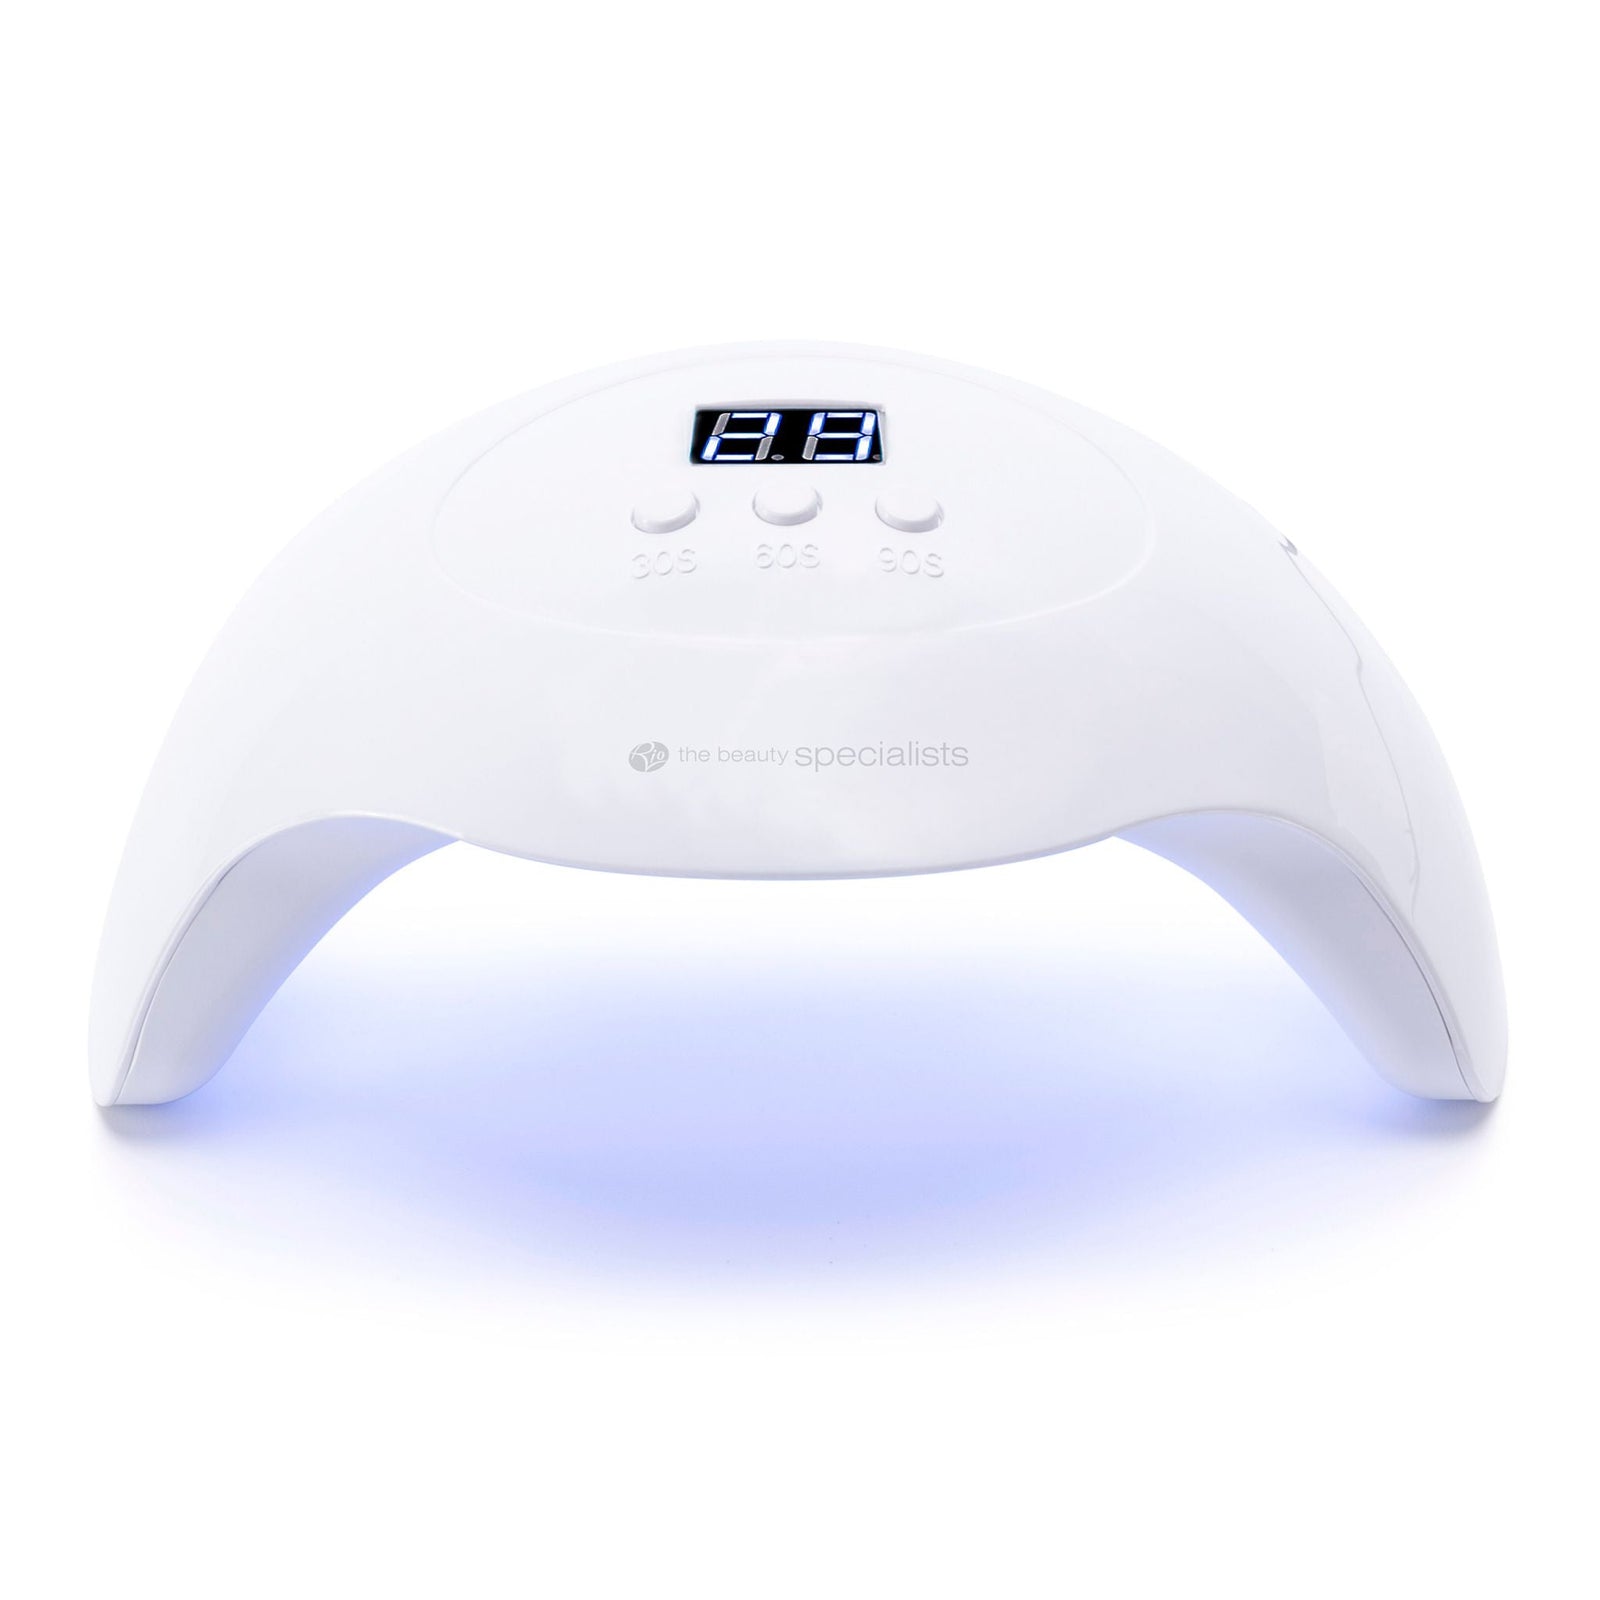 Uv Lamp For Manicure 36w Led Nail Dryer Lamp Sun Light Curing All Gel  Polish Drying Uv Gel Usb Smart at Rs 1499 | UV Lamps | ID: 2850884519912